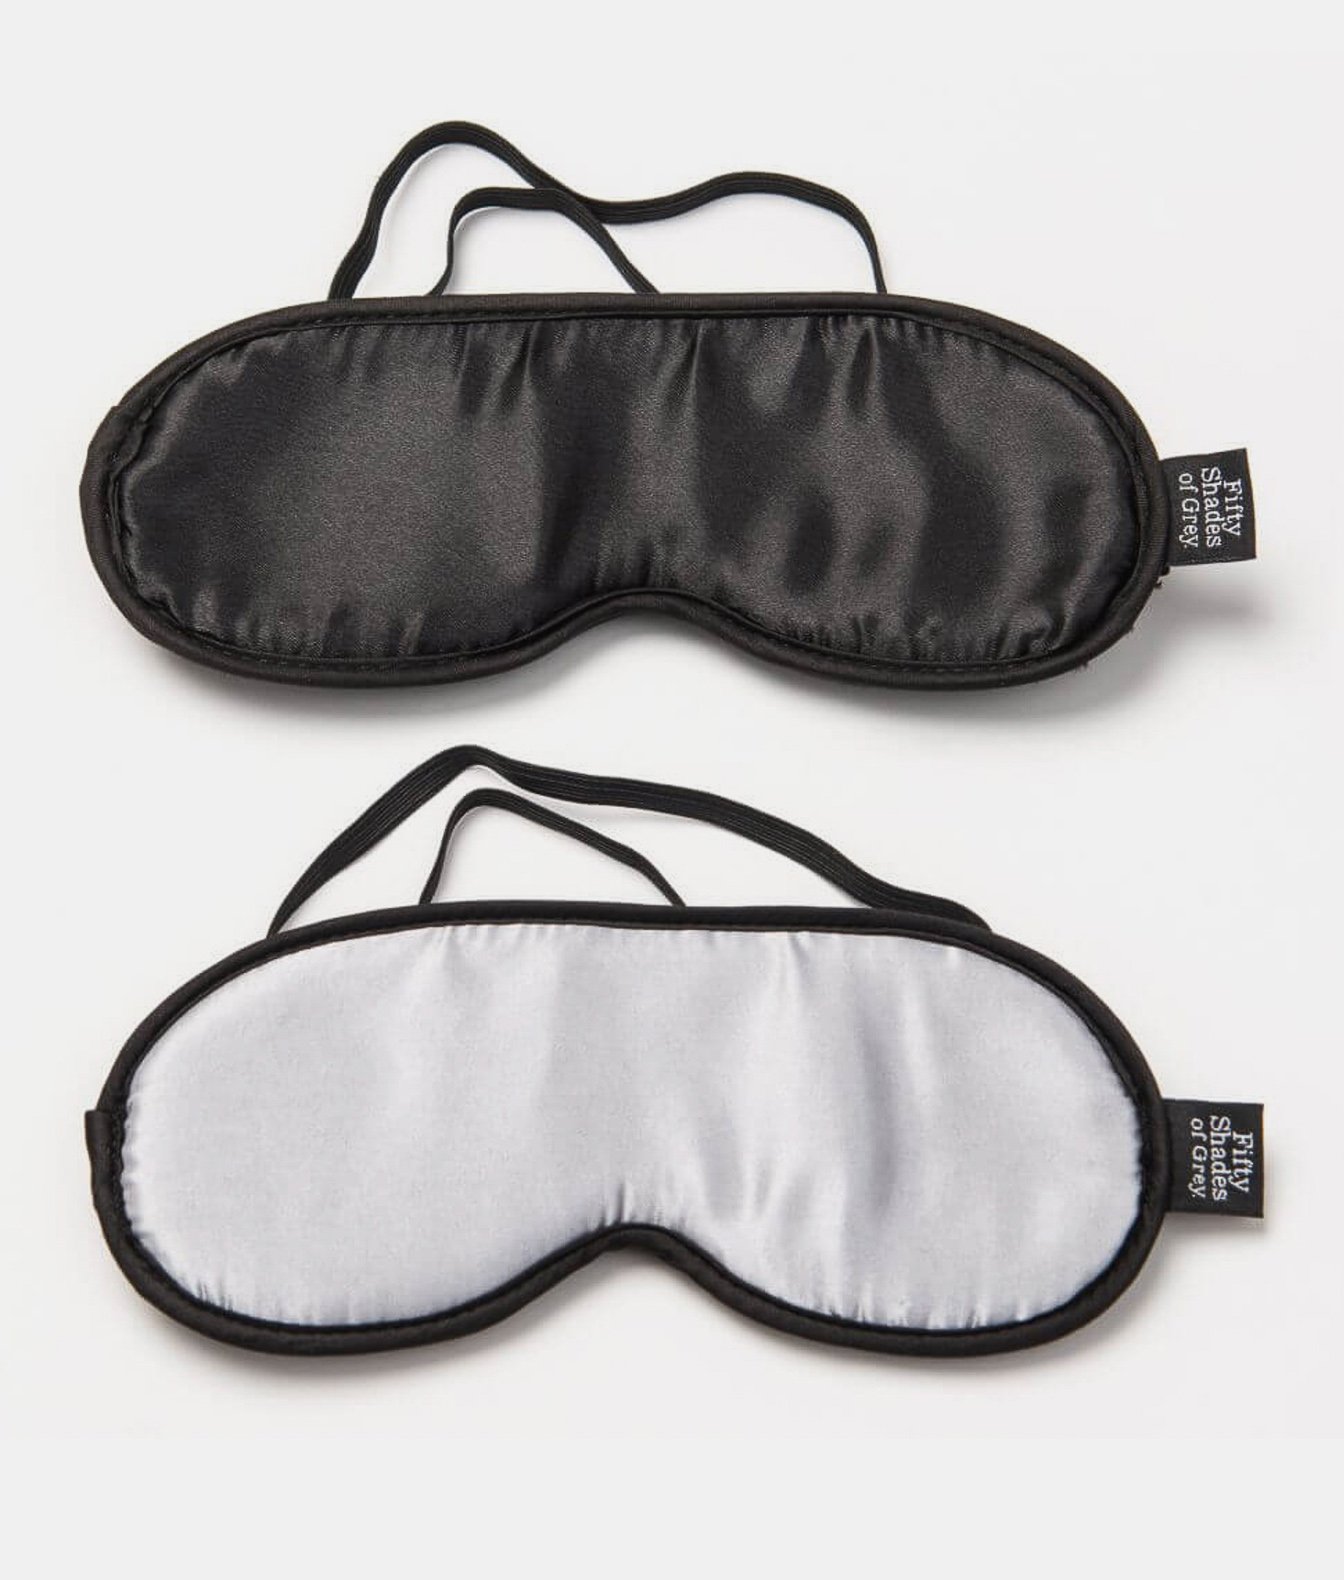 Fifty Shades of Grey No Peeking Soft Blindfold Twin Pack 